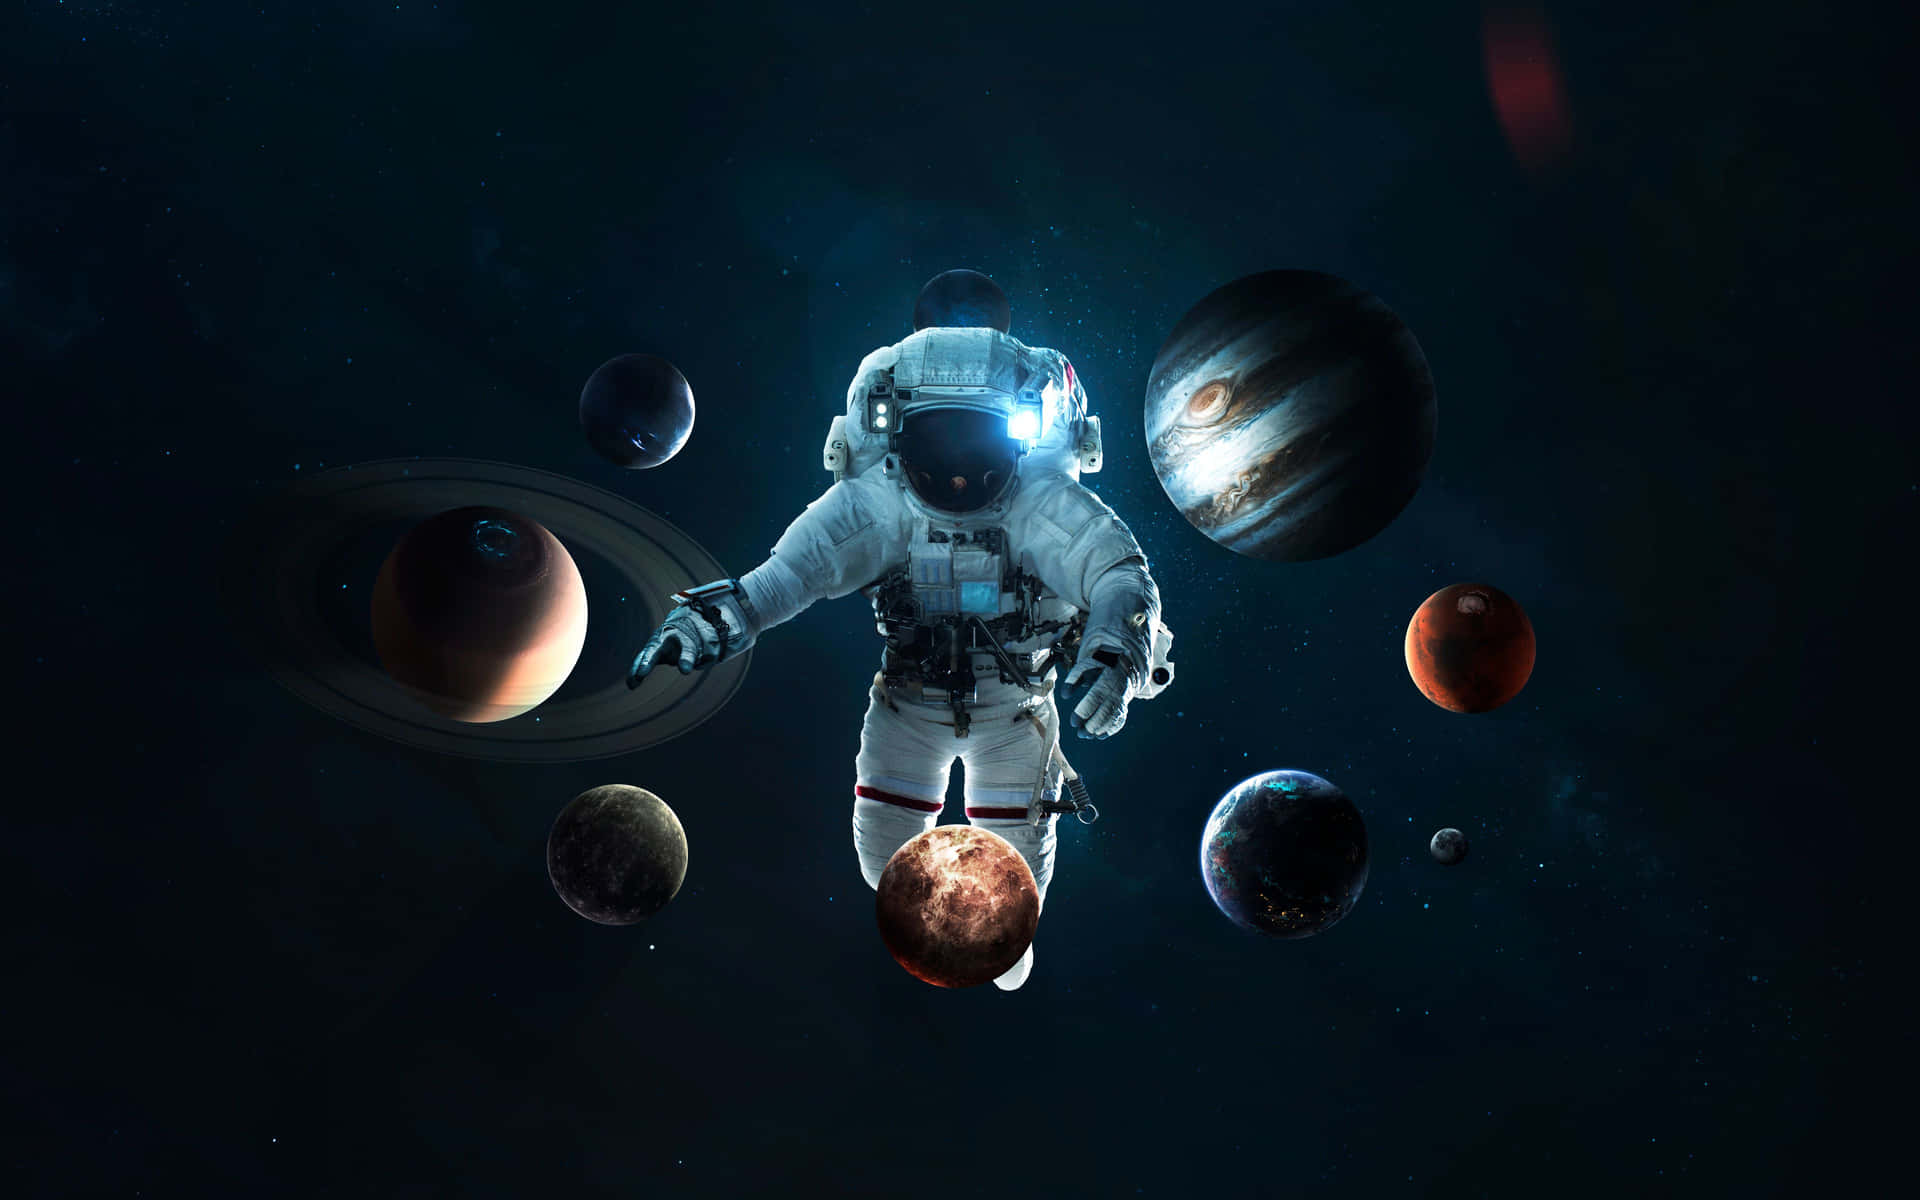 Astronaut stepping onto a cosmic landscape Wallpaper